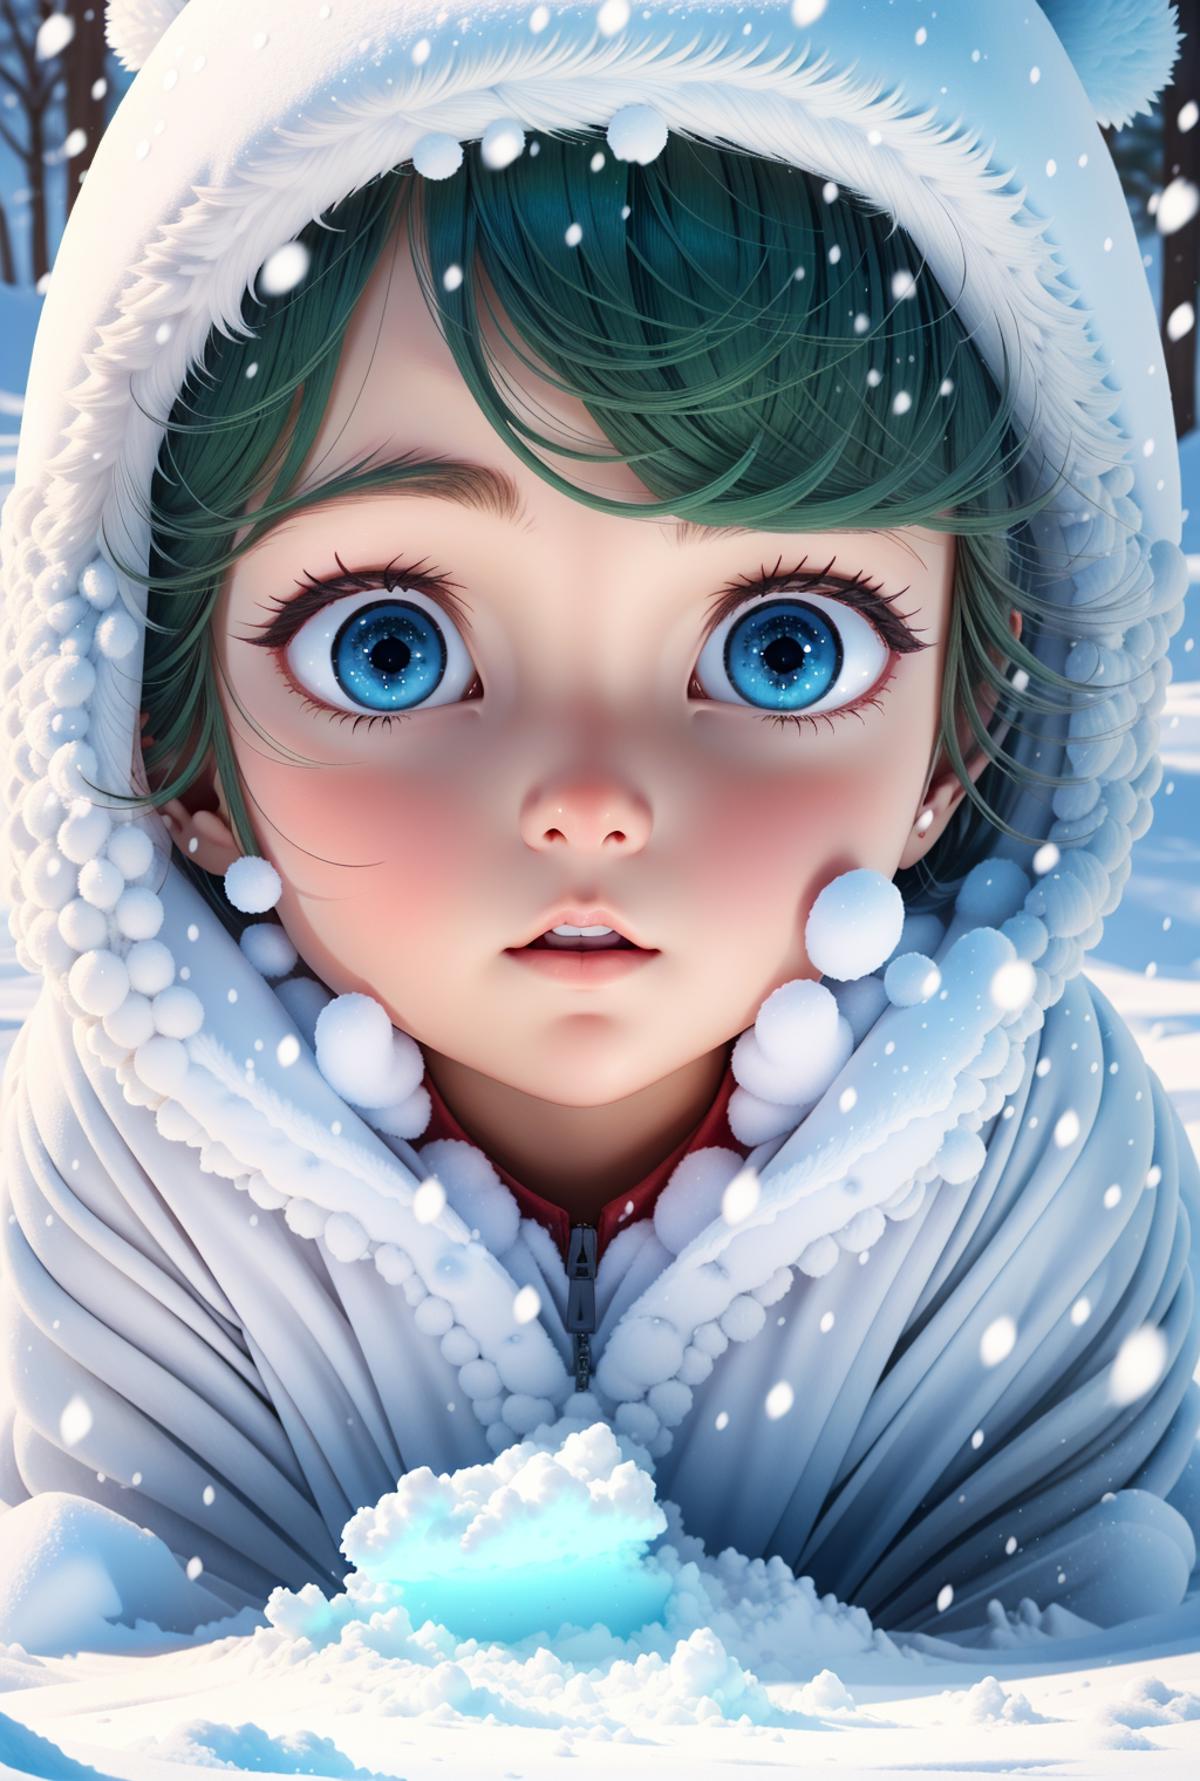 snow baby 动画雪宝宝 image by fansay